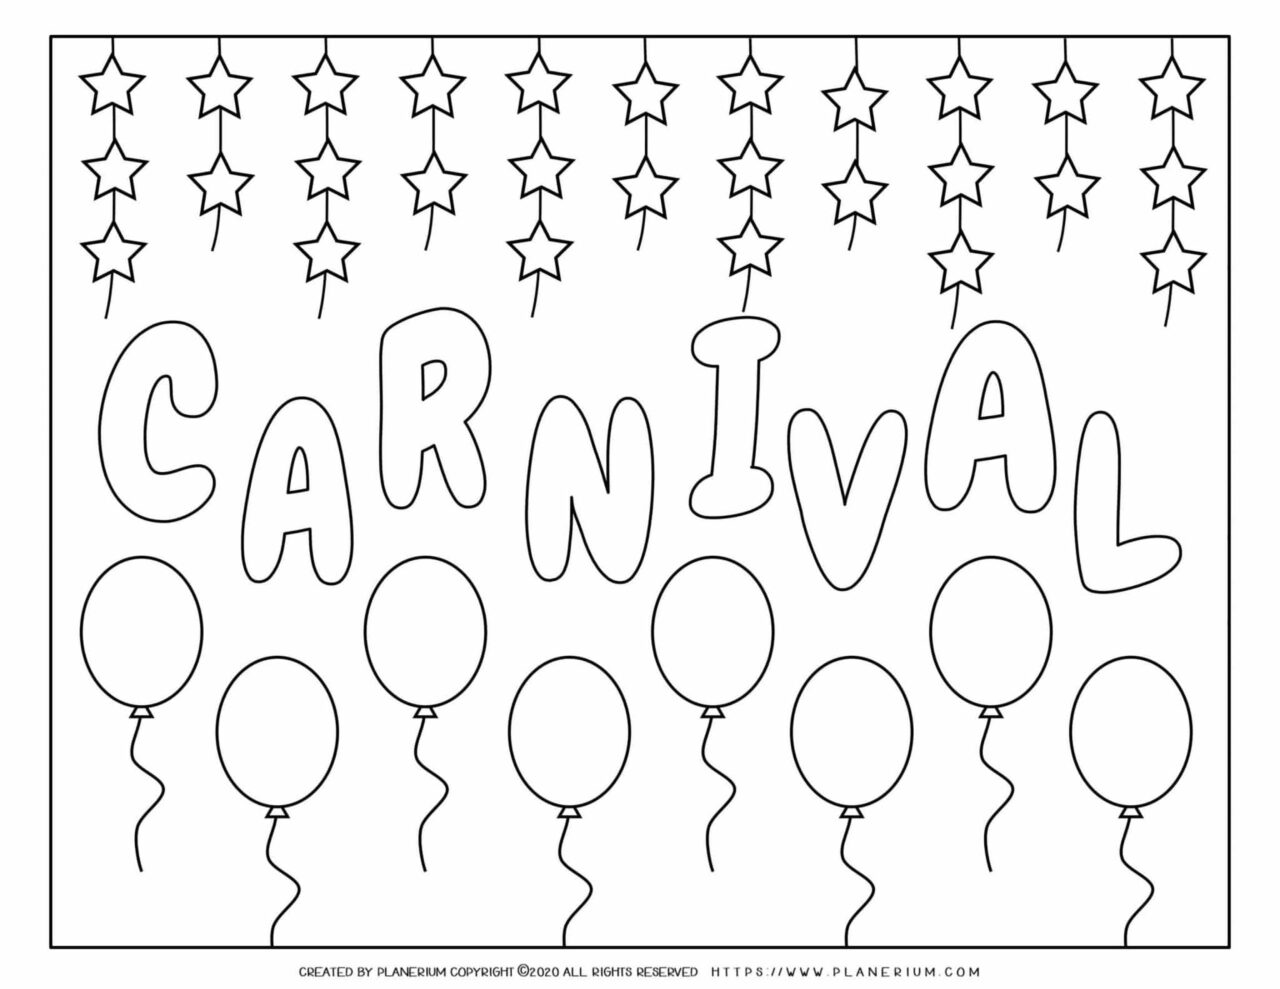 Carnival - Coloring Page Worksheet - Carnival Balloons | Planerium